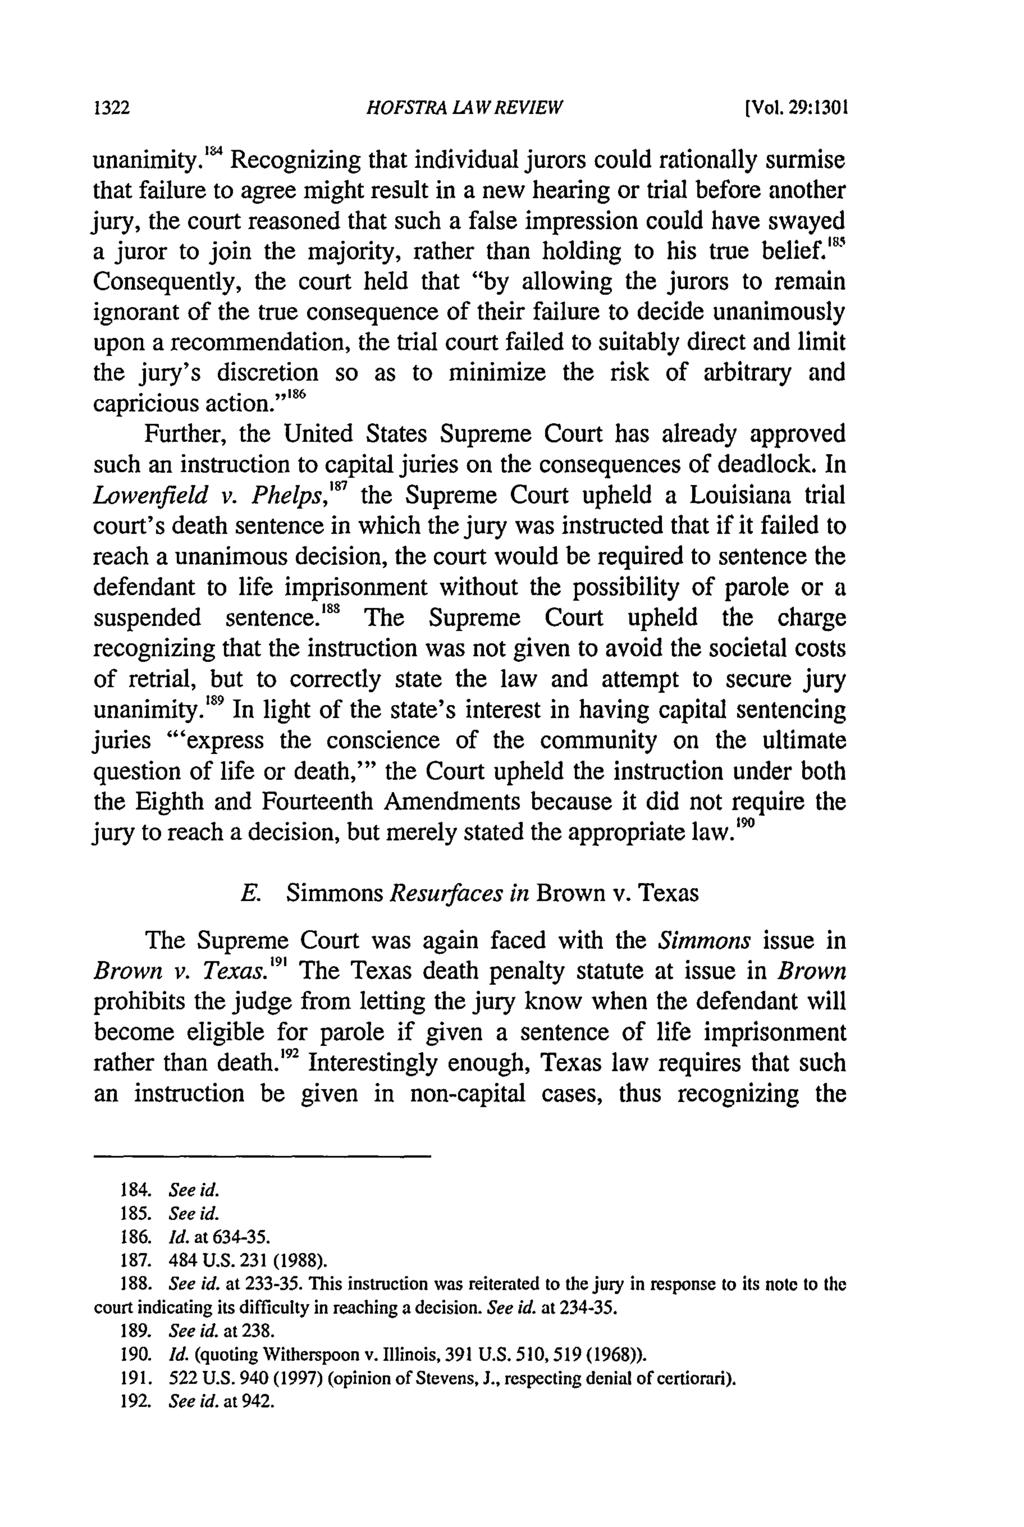 Hofstra Law Review, Vol. 29, Iss. 4 [2001], Art. 11 HOFSTRA LAW REVIEW [Vol. 29:1301 unanimity.